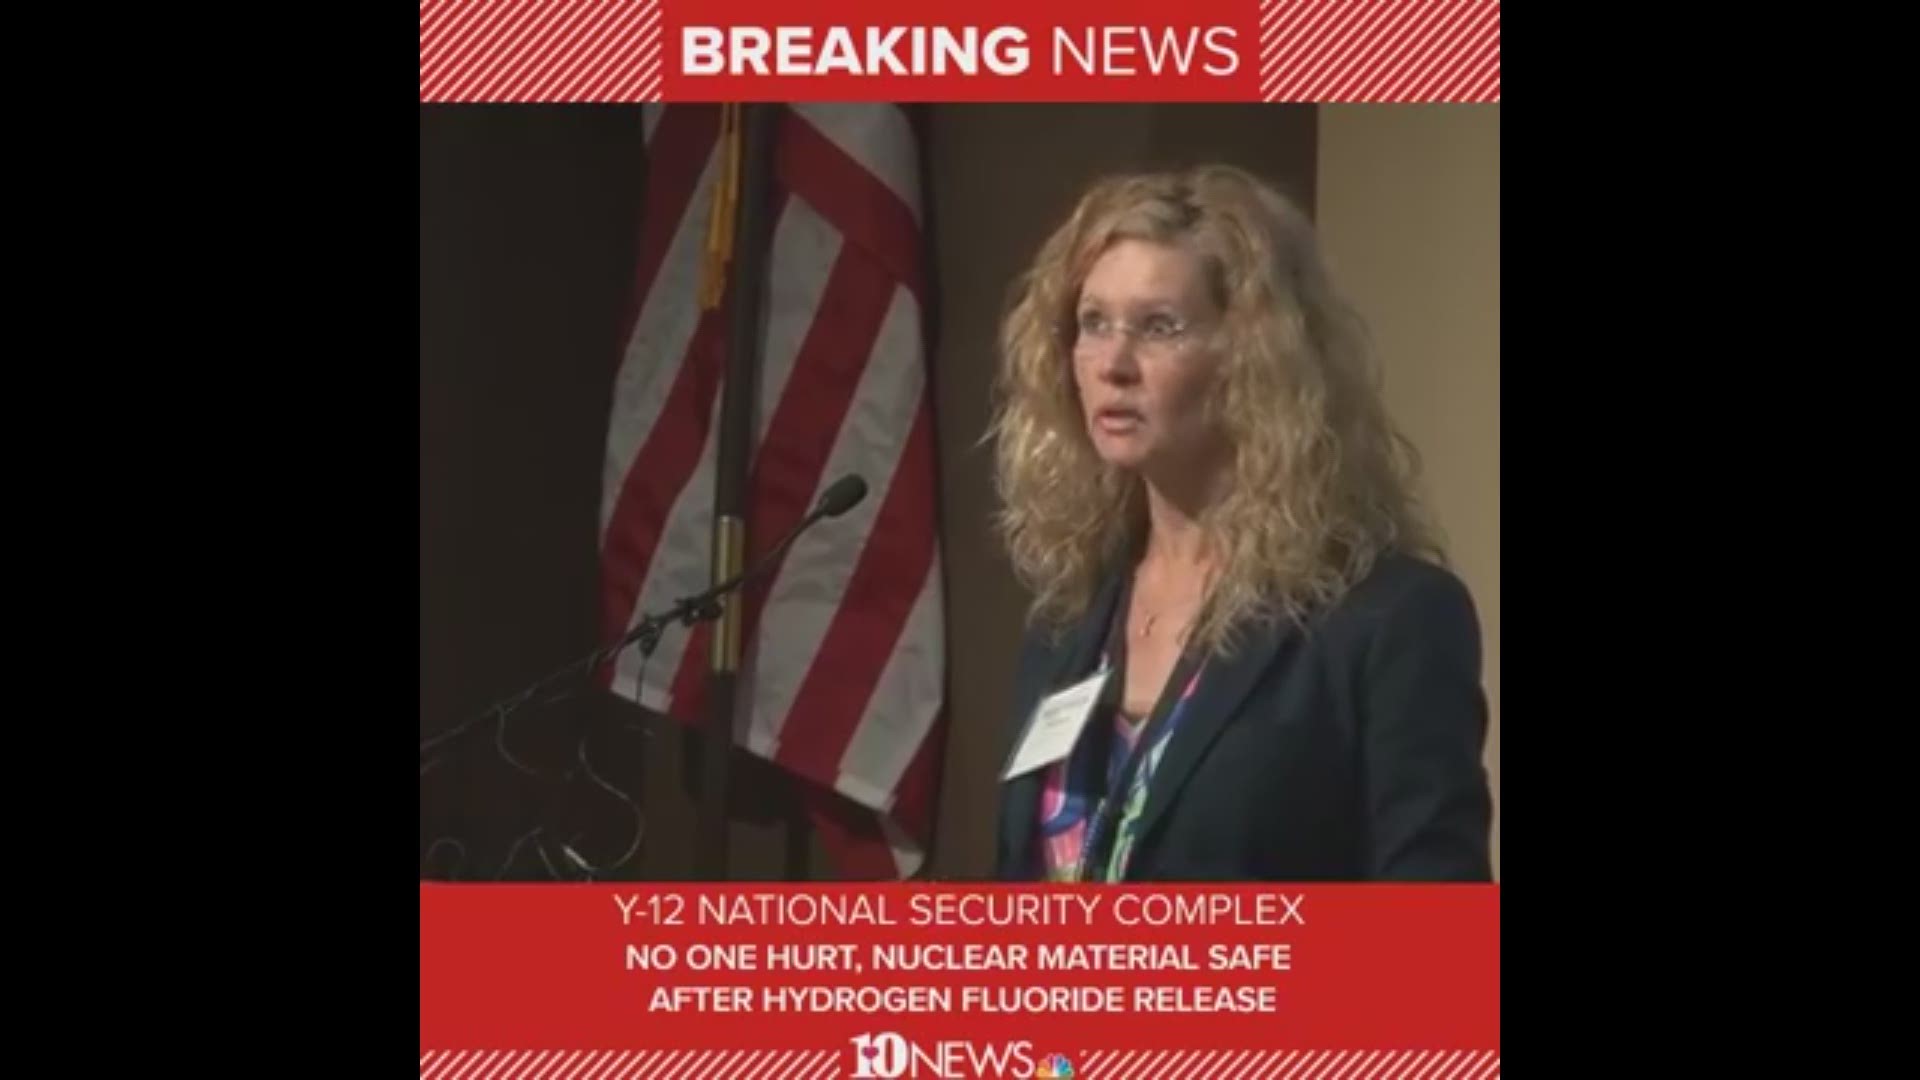 Hydrogen fluoride, a potentially deadly chemical, was accidentally released in a small enclosure at the Y-12 National Security Complex in Oak Ridge and required an emergency response Thursday morning.